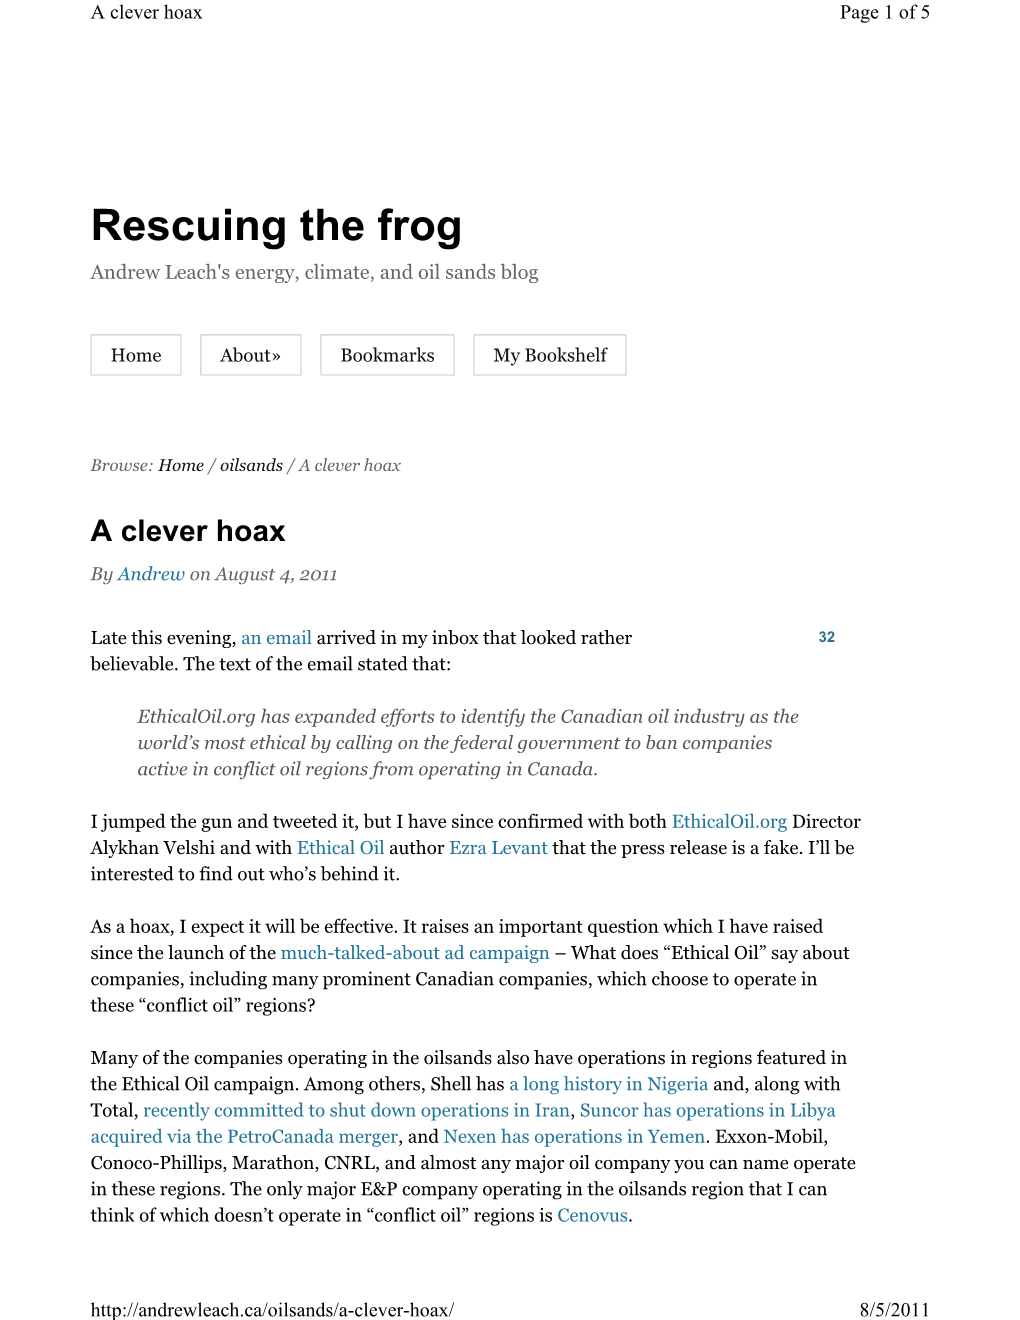 Rescuing the Frog Andrew Leach's Energy, Climate, and Oil Sands Blog